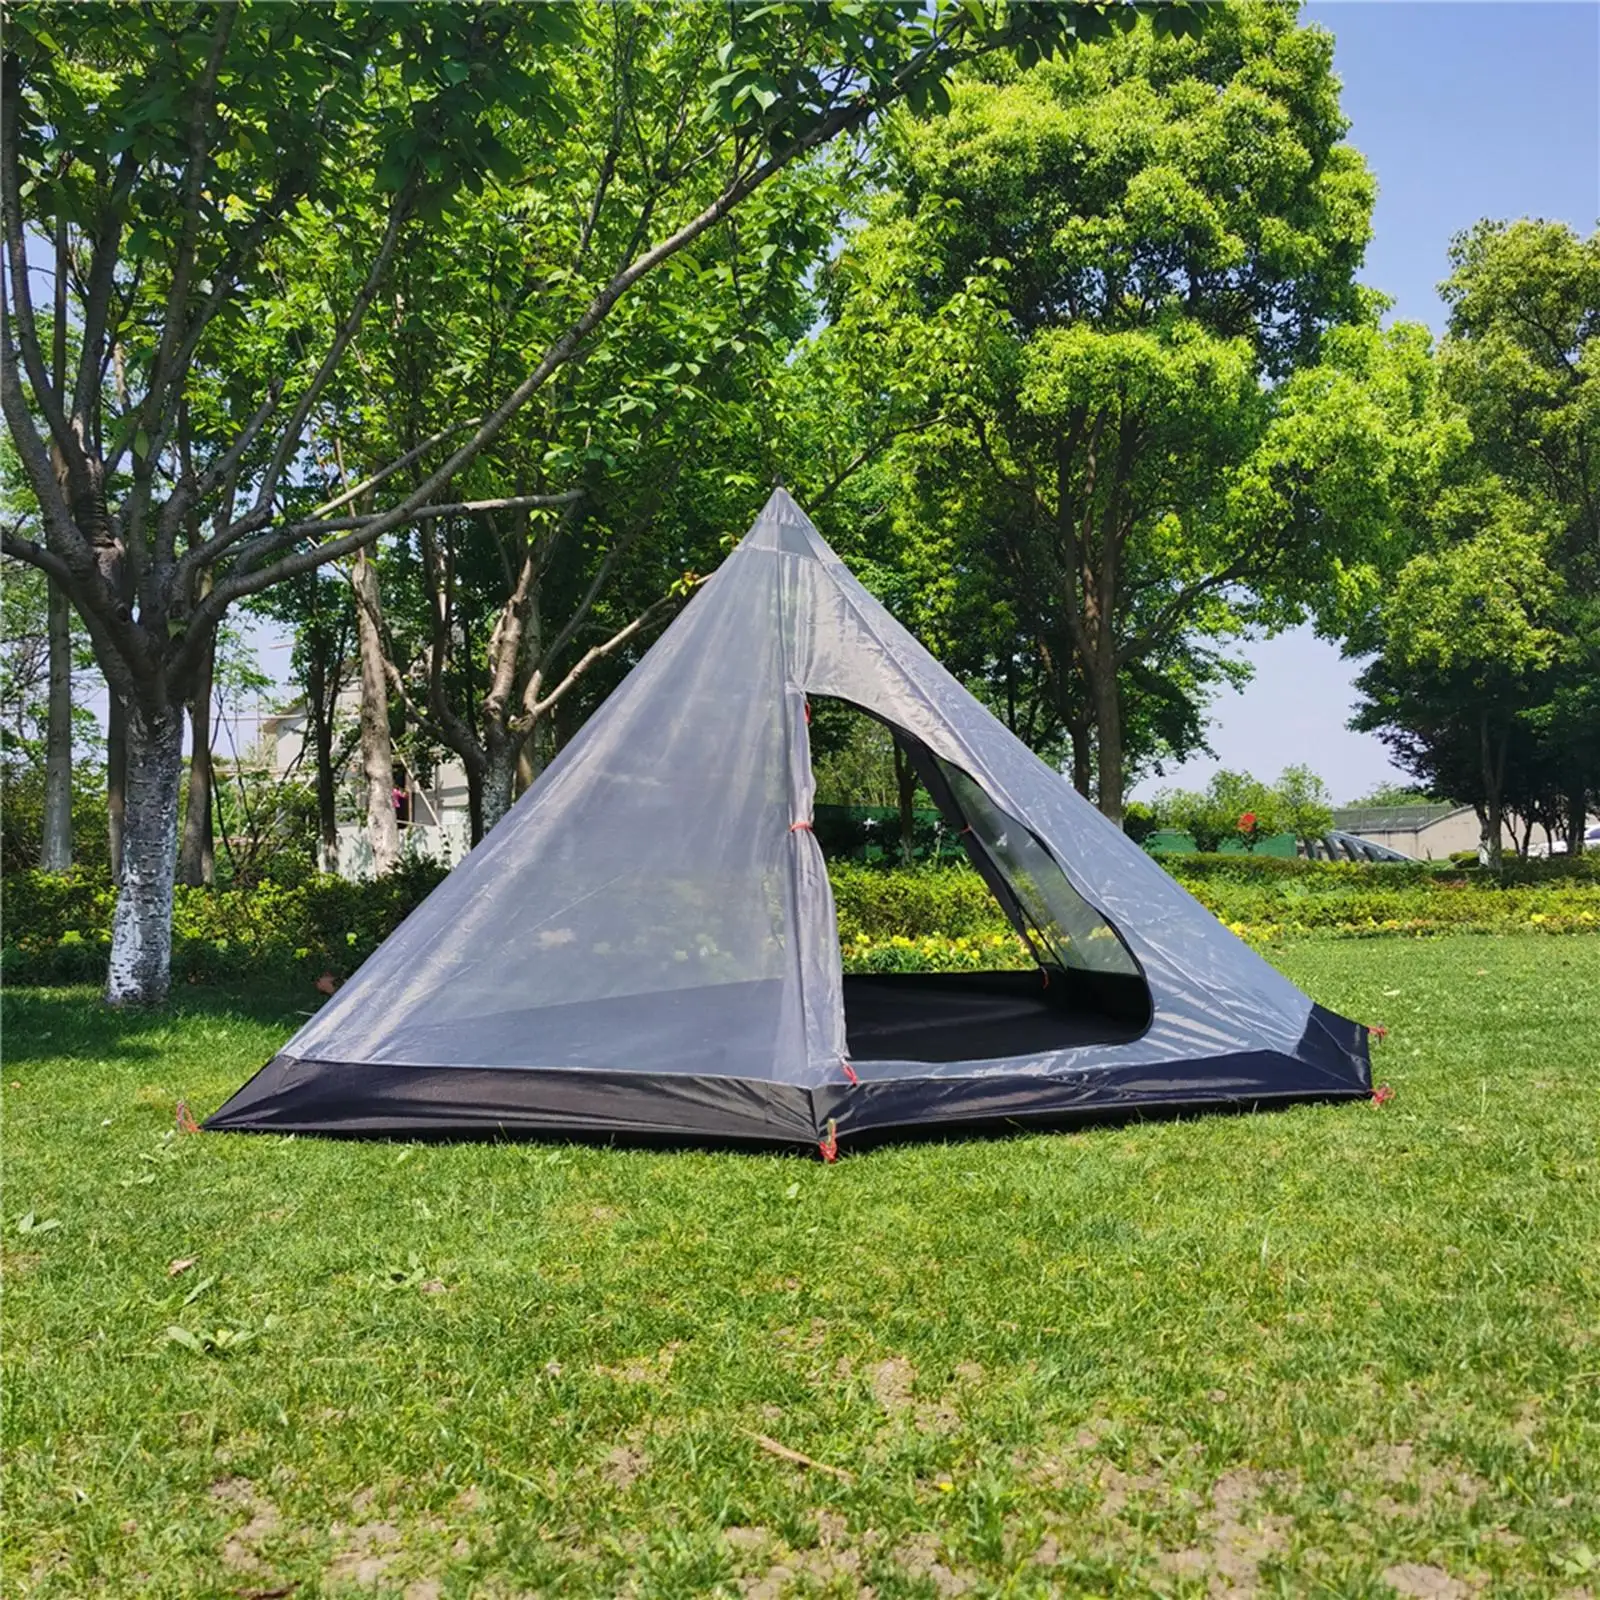 Portable Pyramid Tent Anti   Tent Outdoor Camping Tent for Trekking